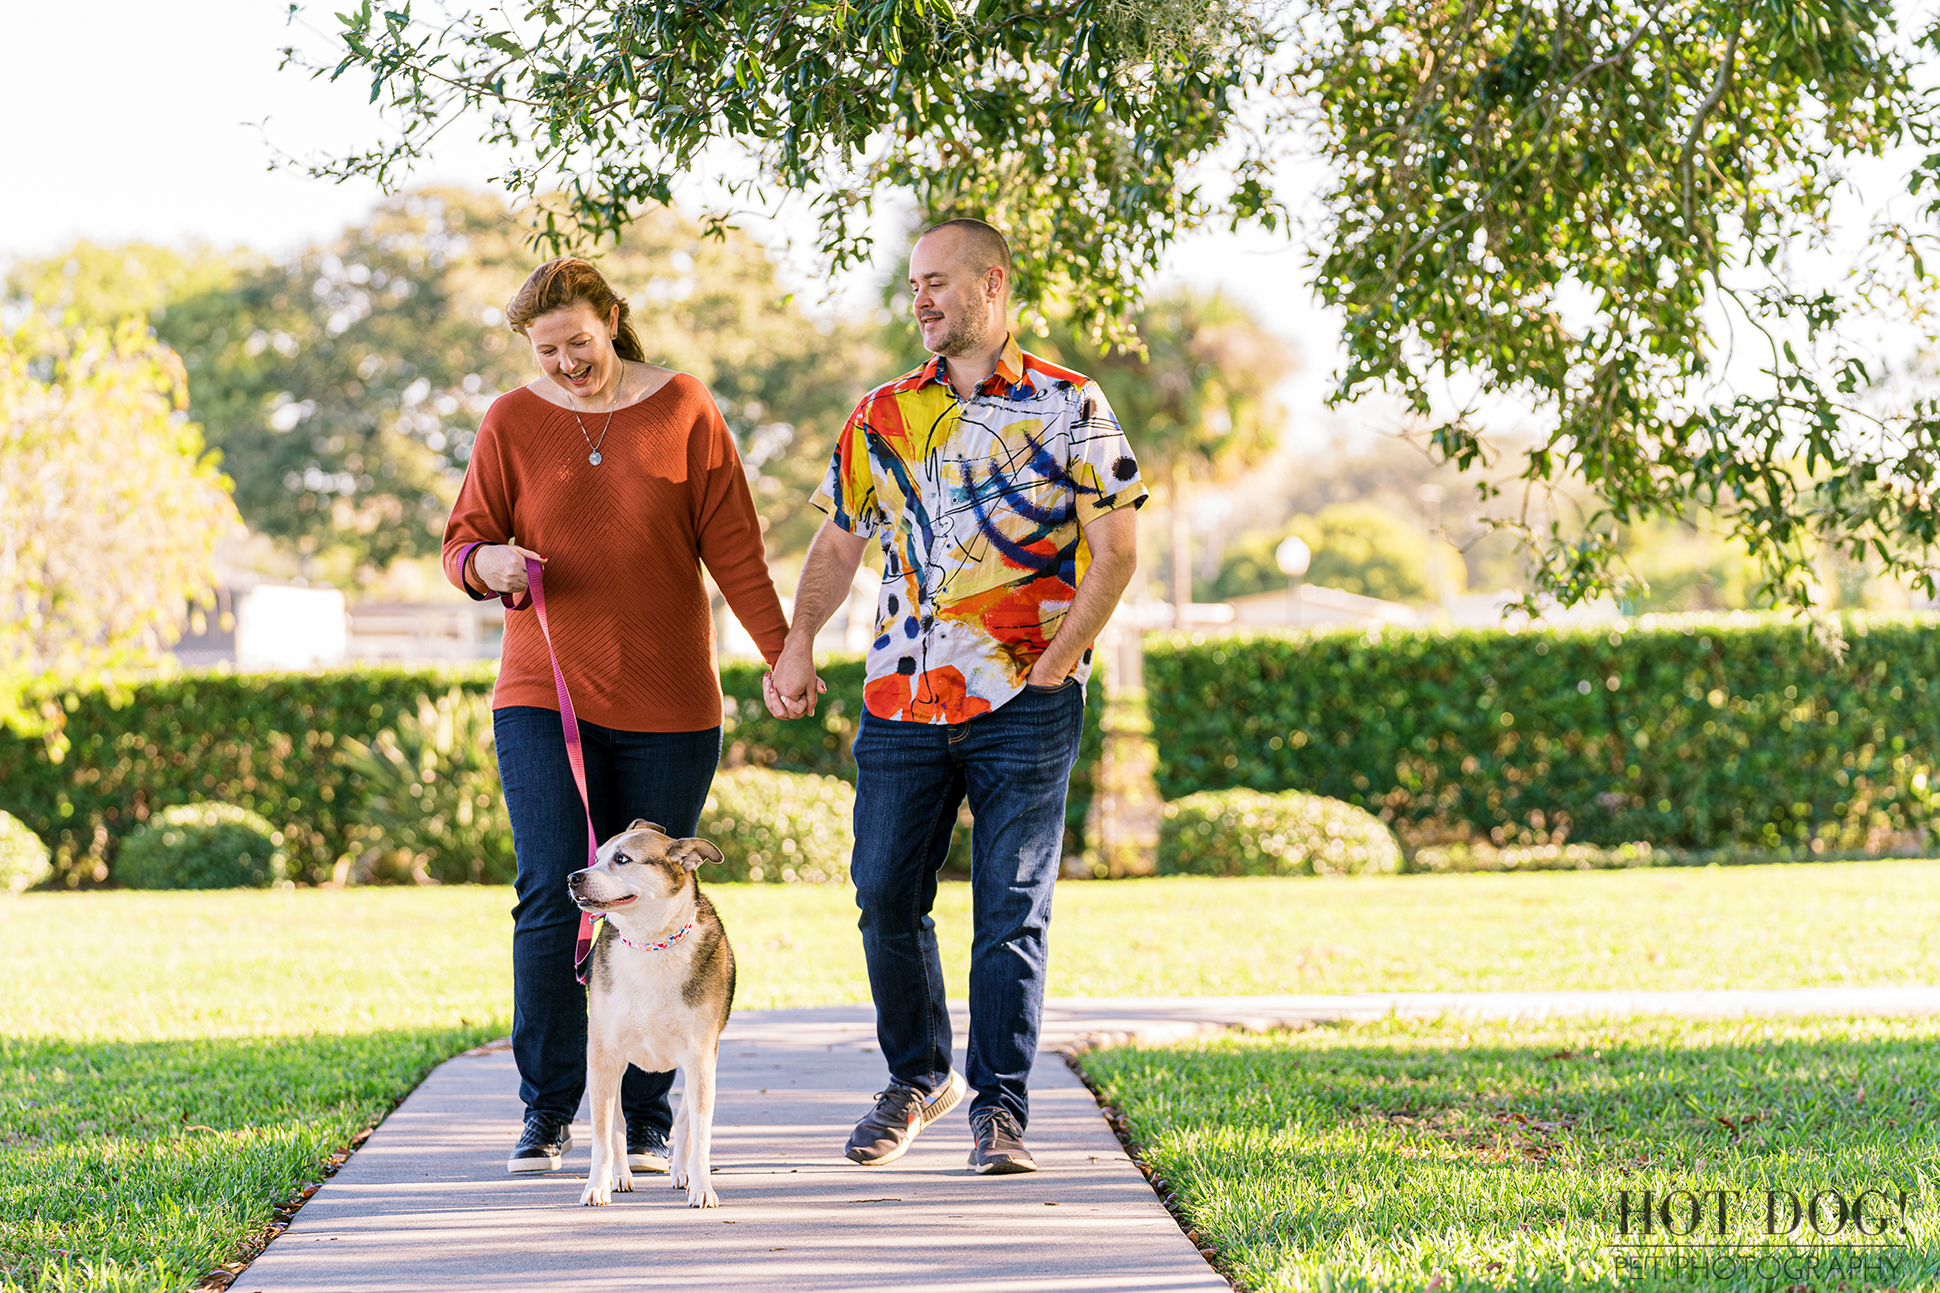 Zoe leads the way as her parents stroll behind her in Newton Park in Winter Garden, Florida. (Photo by Hot Dog! Pet Photography)